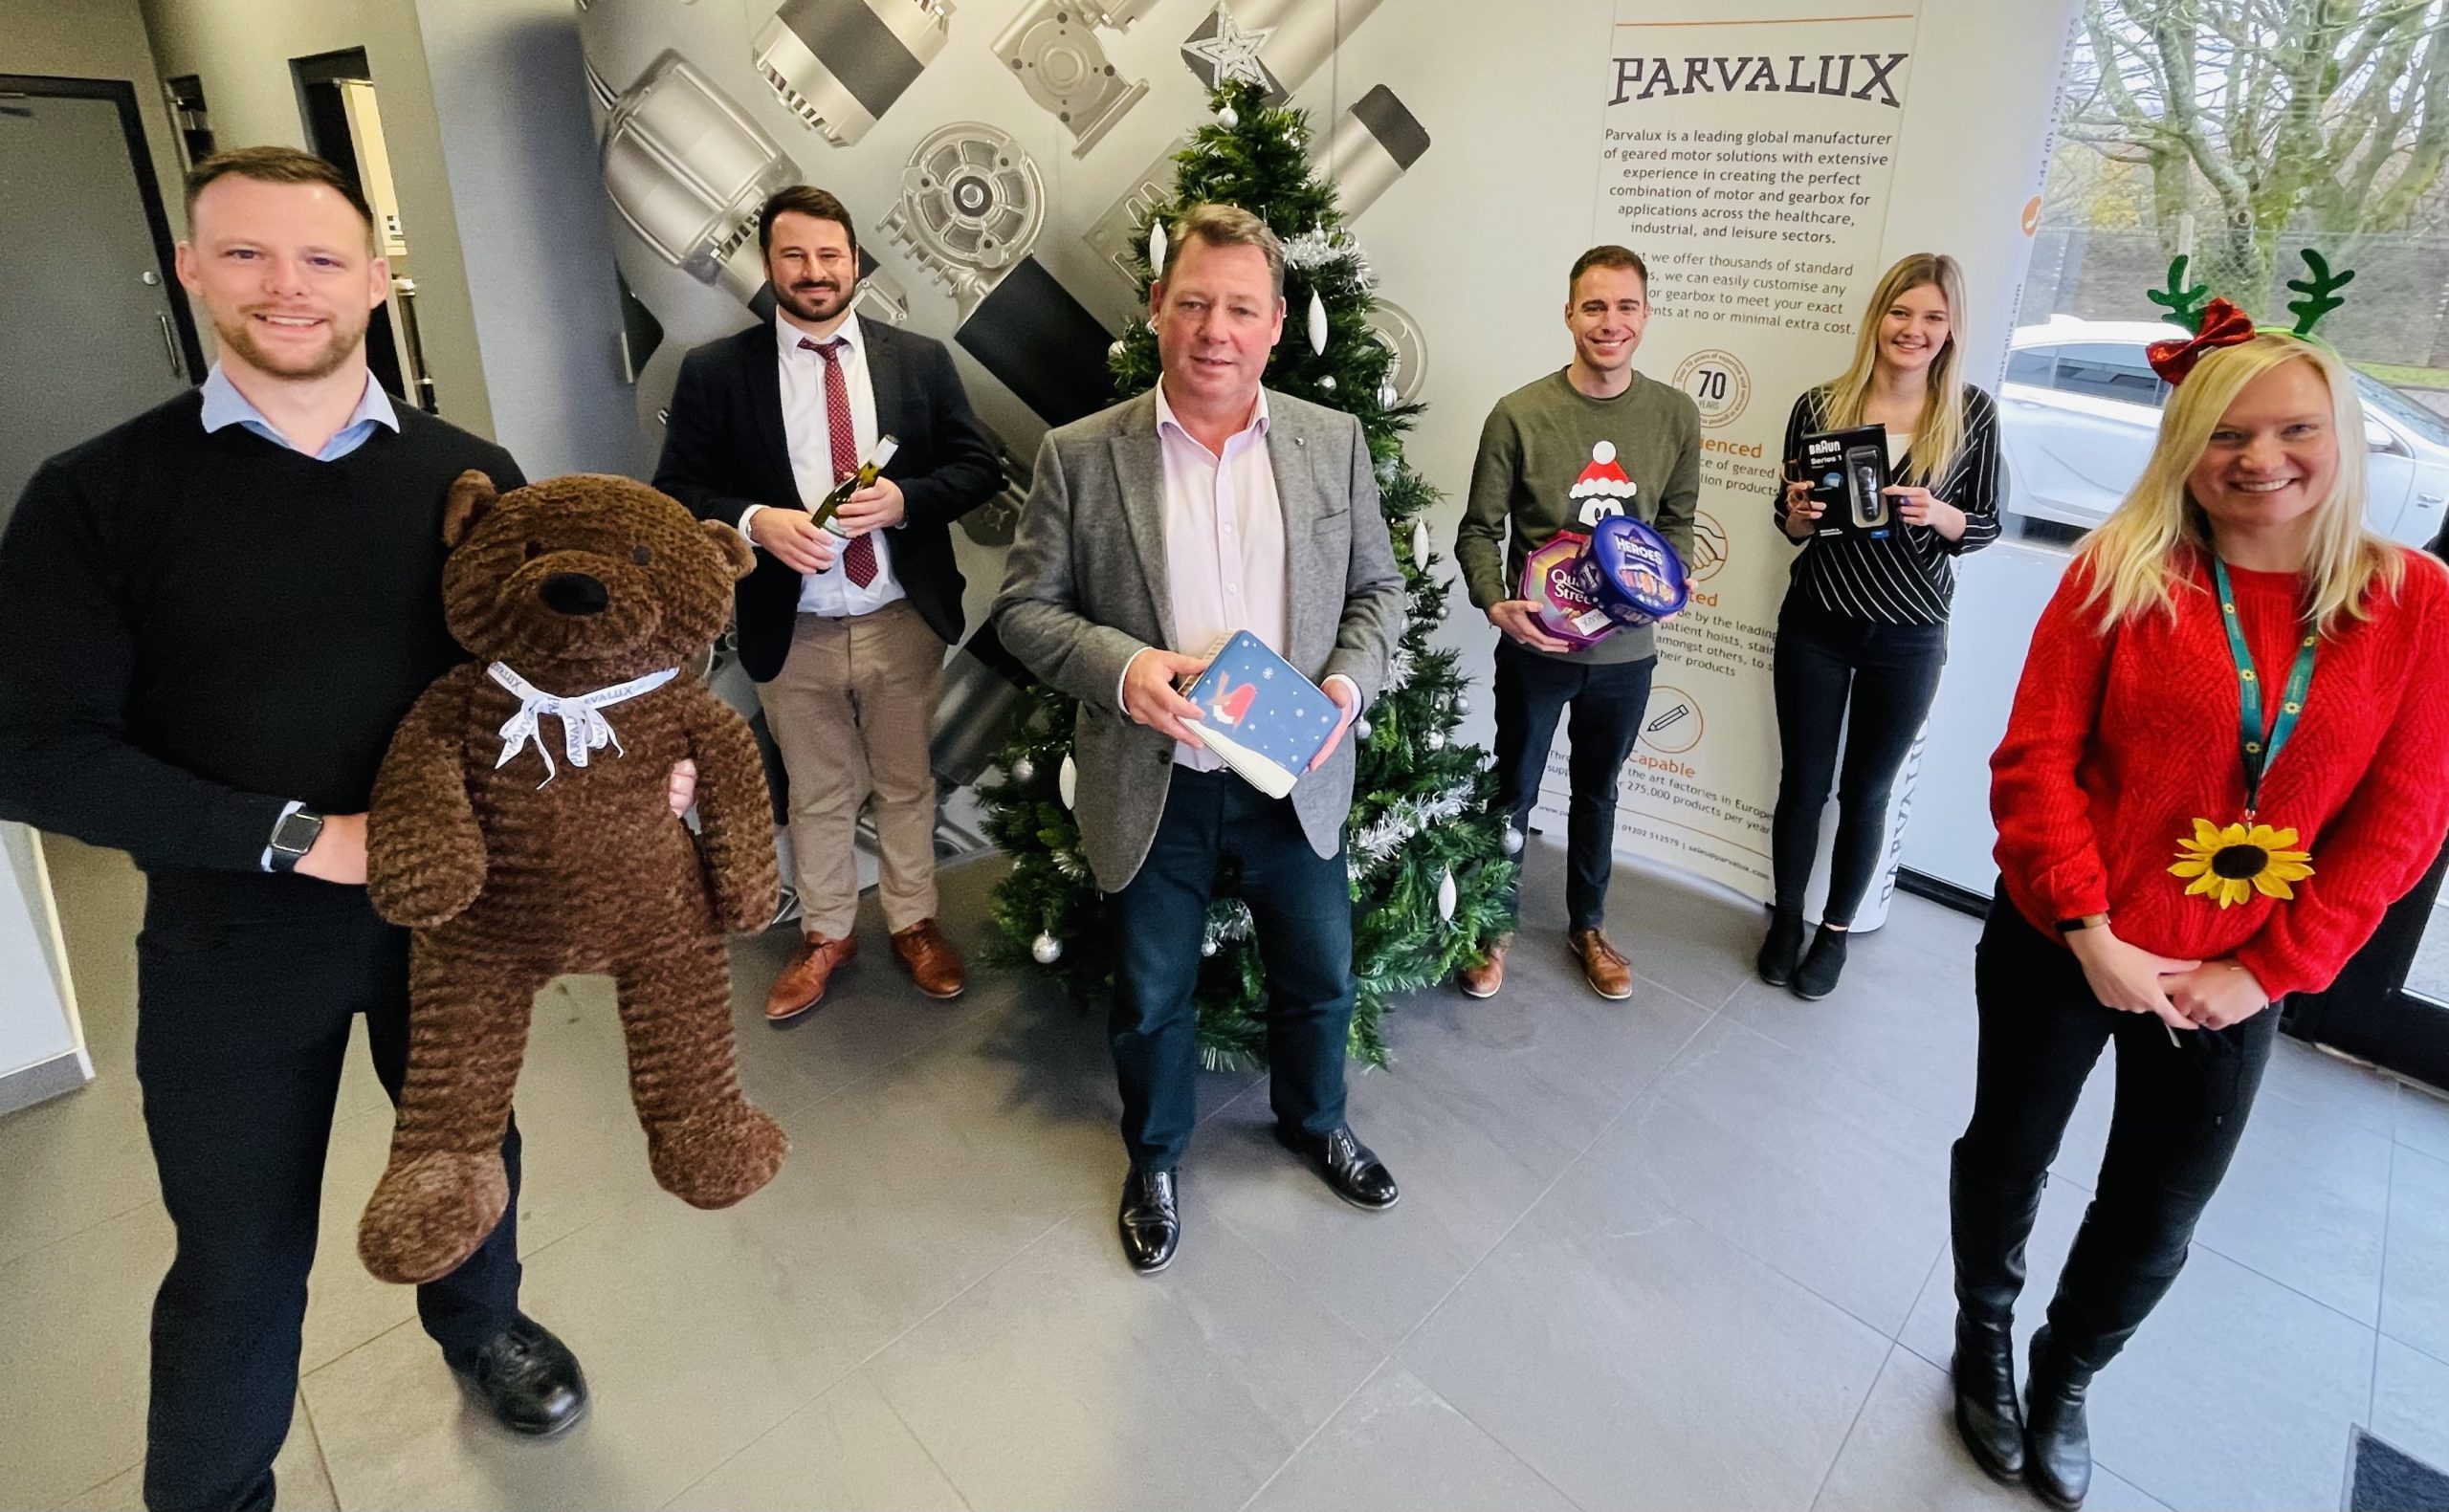 Parvalux team gear up with festive fundraising bonanza for Lewis-Manning Hospice Care